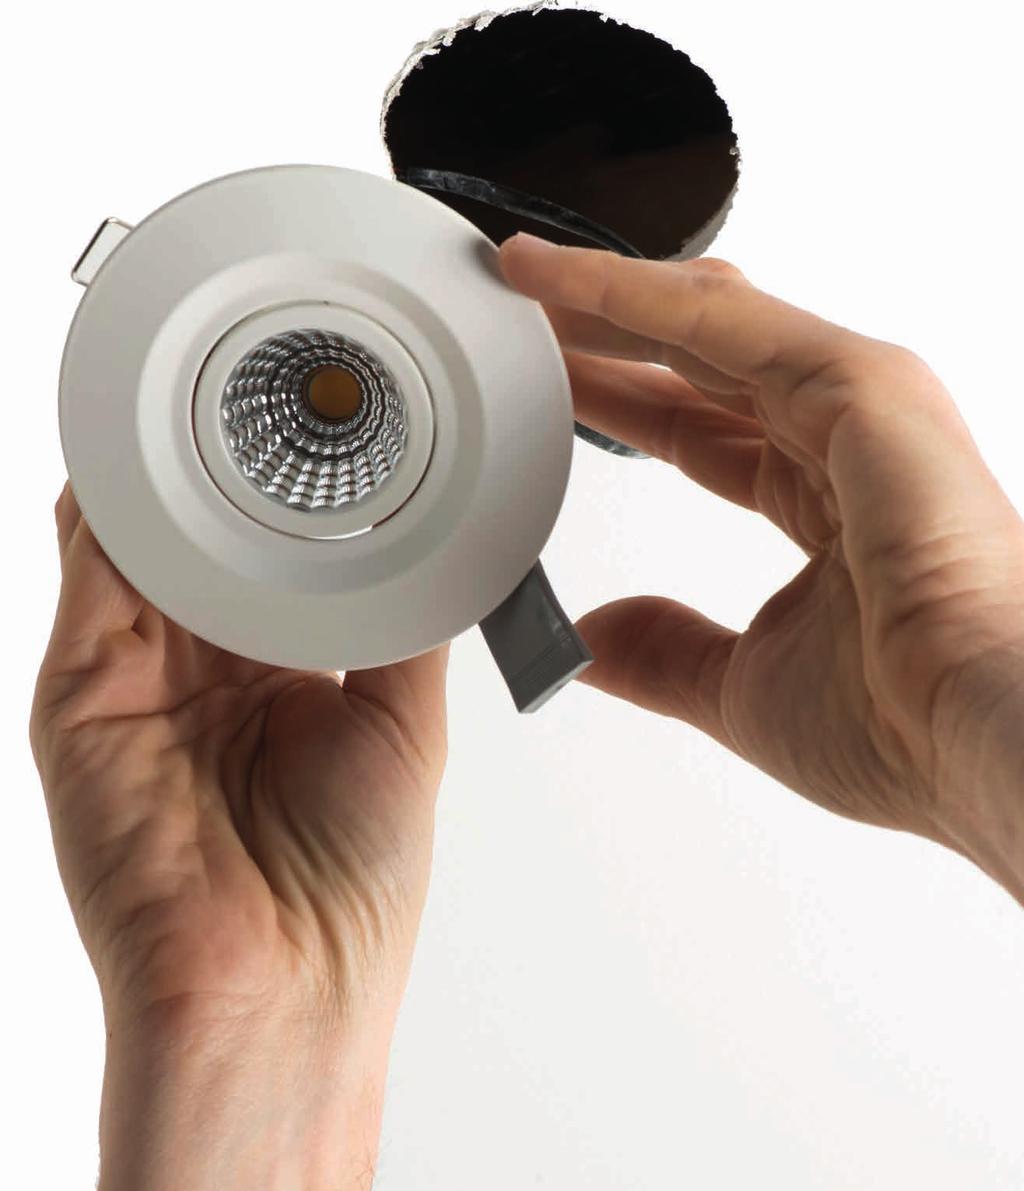 Physical Size If you re replacing existing downlights, measure the holes and make sure the new